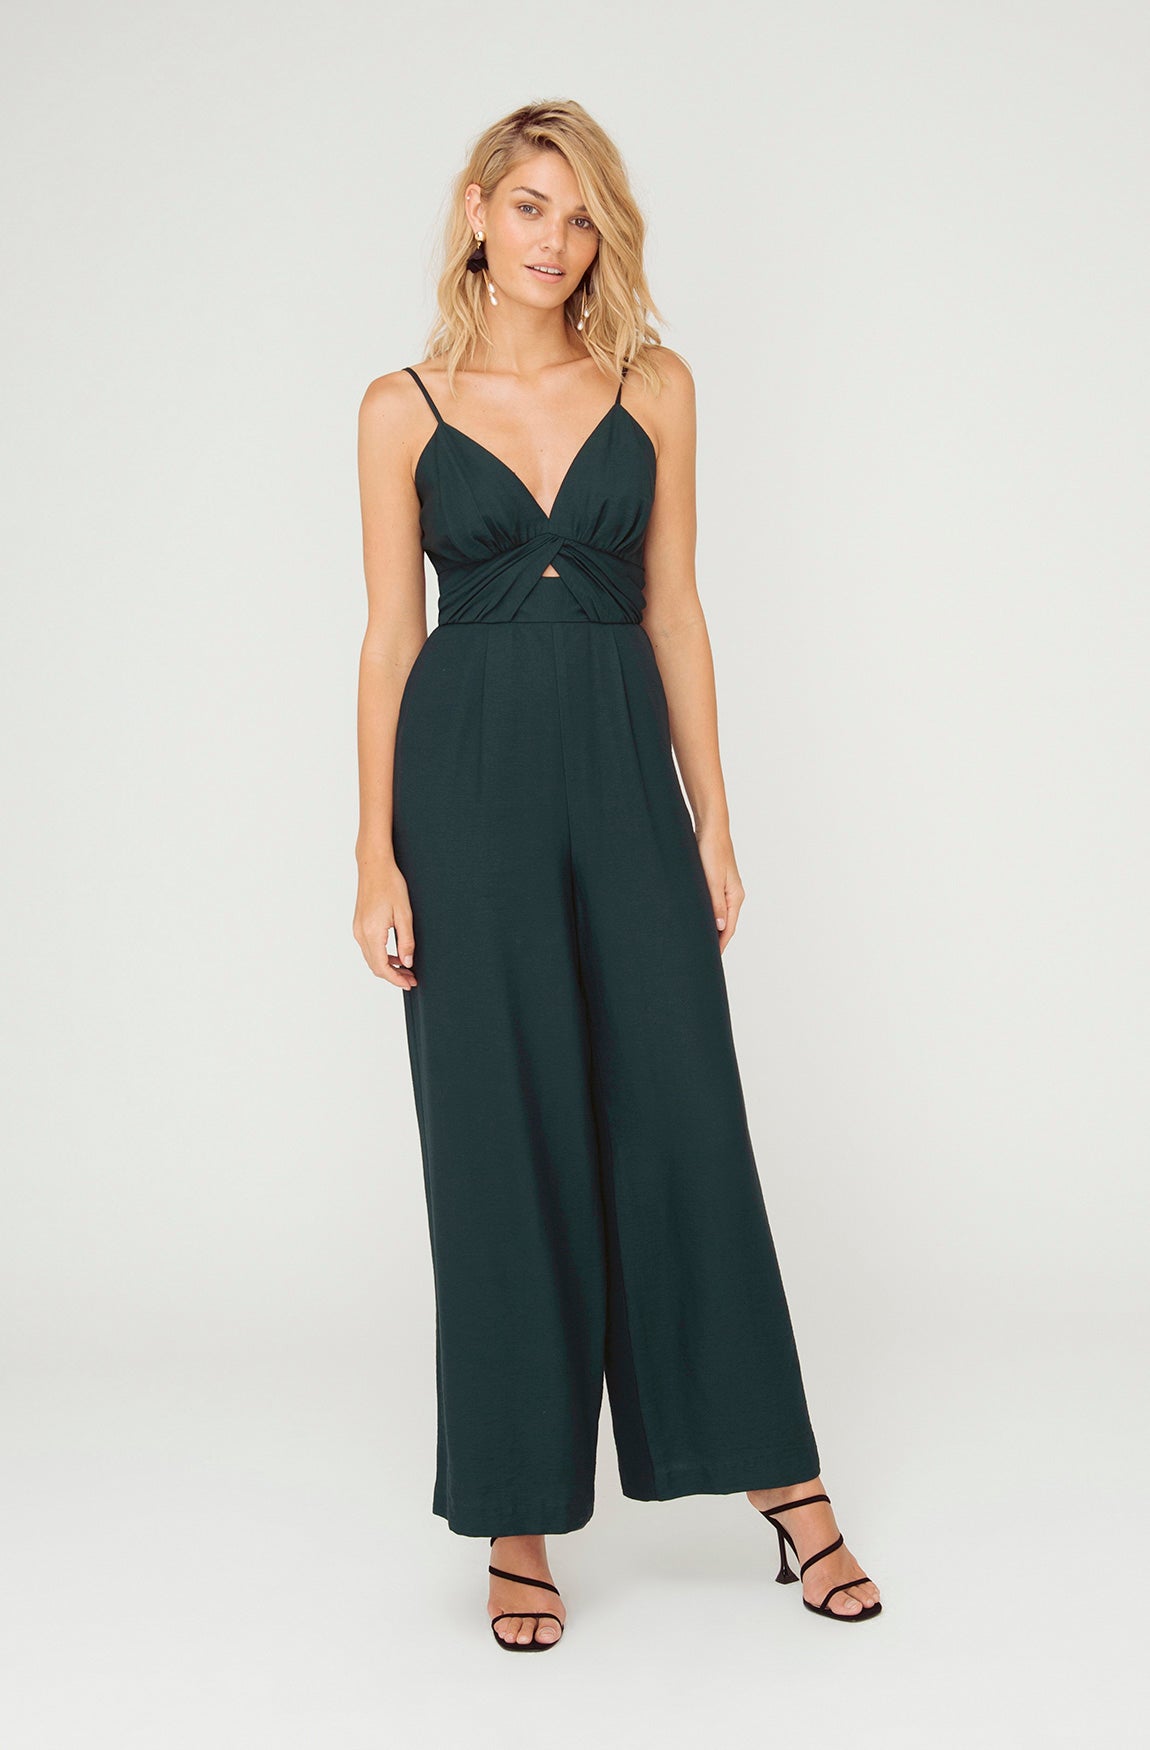 Women's Jumpsuits and Playsuits For Sale Online | SHEIKE Shop Online